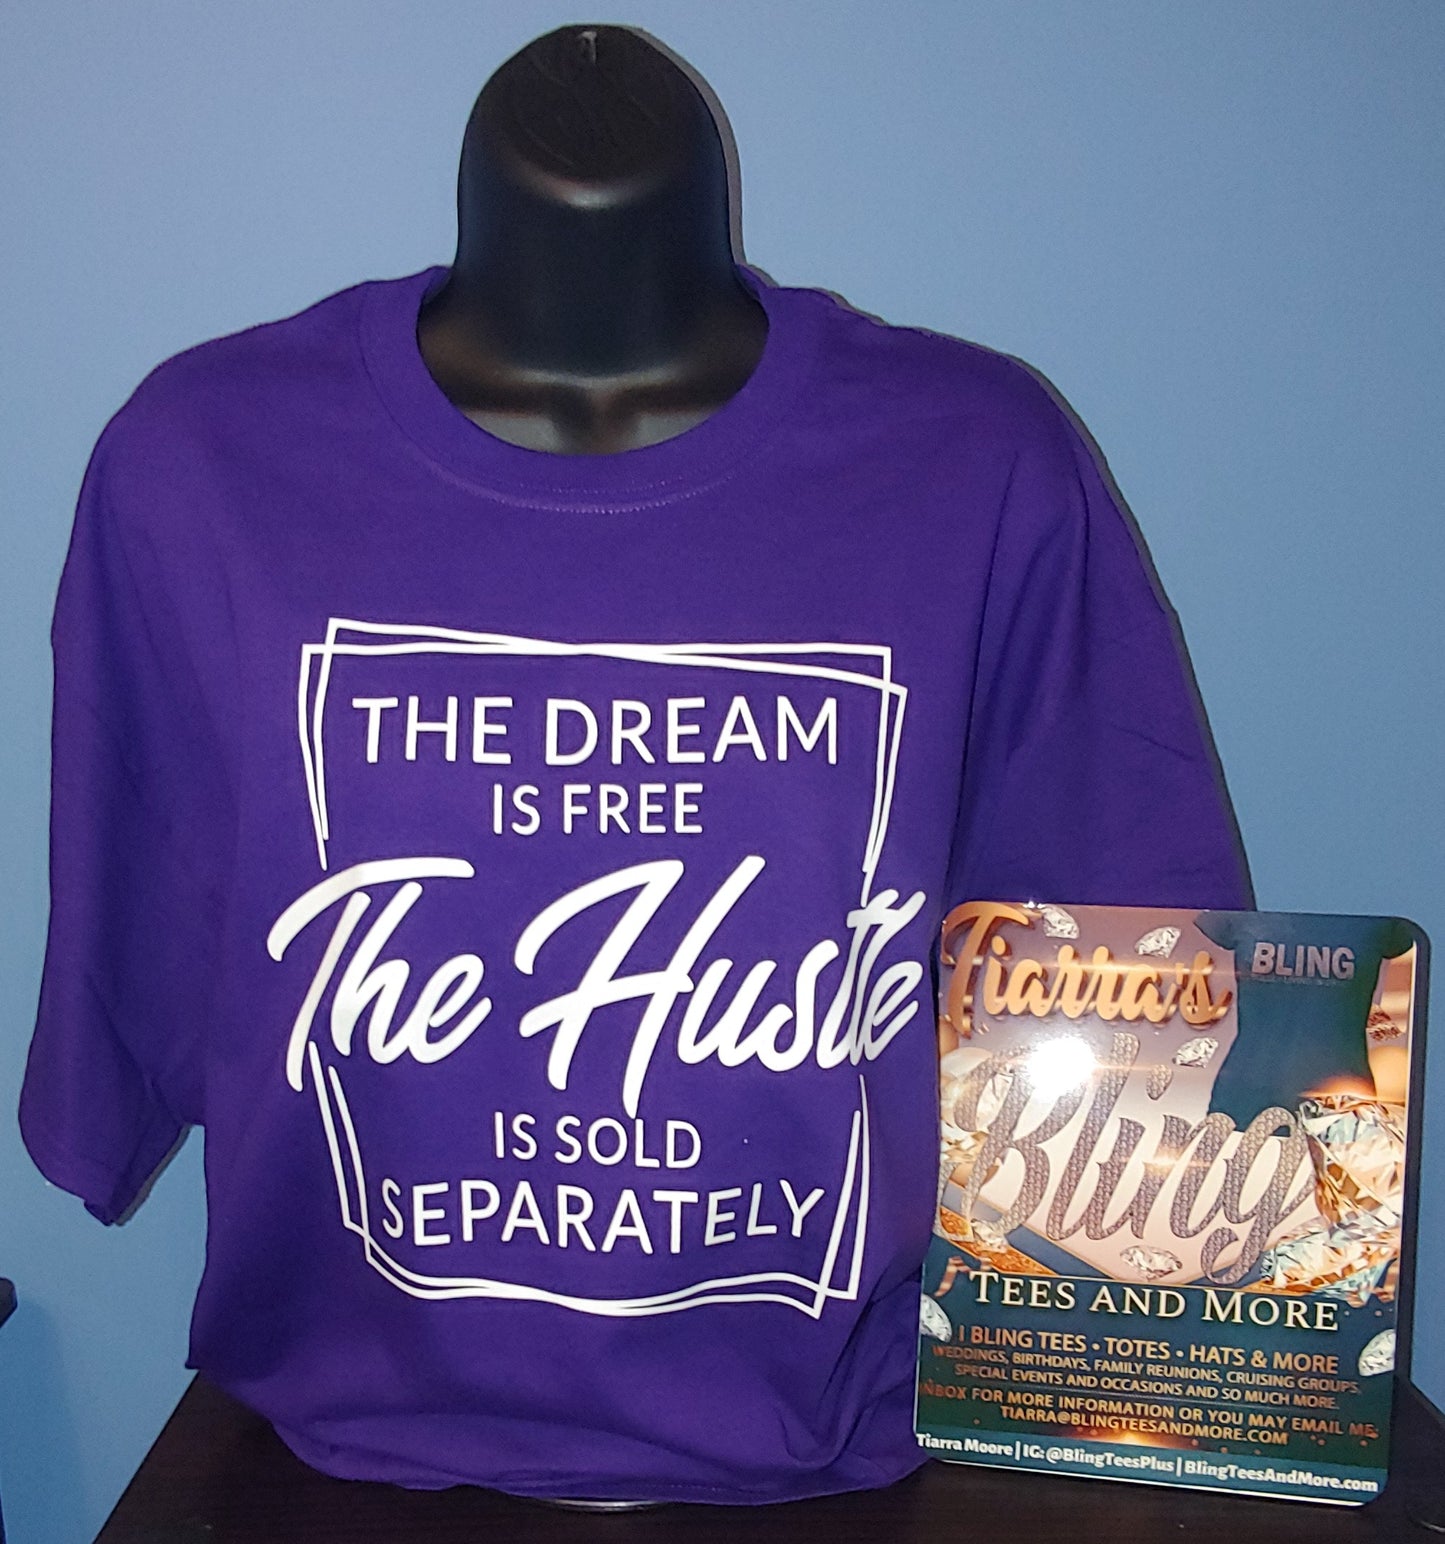 The Dream is Free, The Hustle is Sold Separately T-Shirt